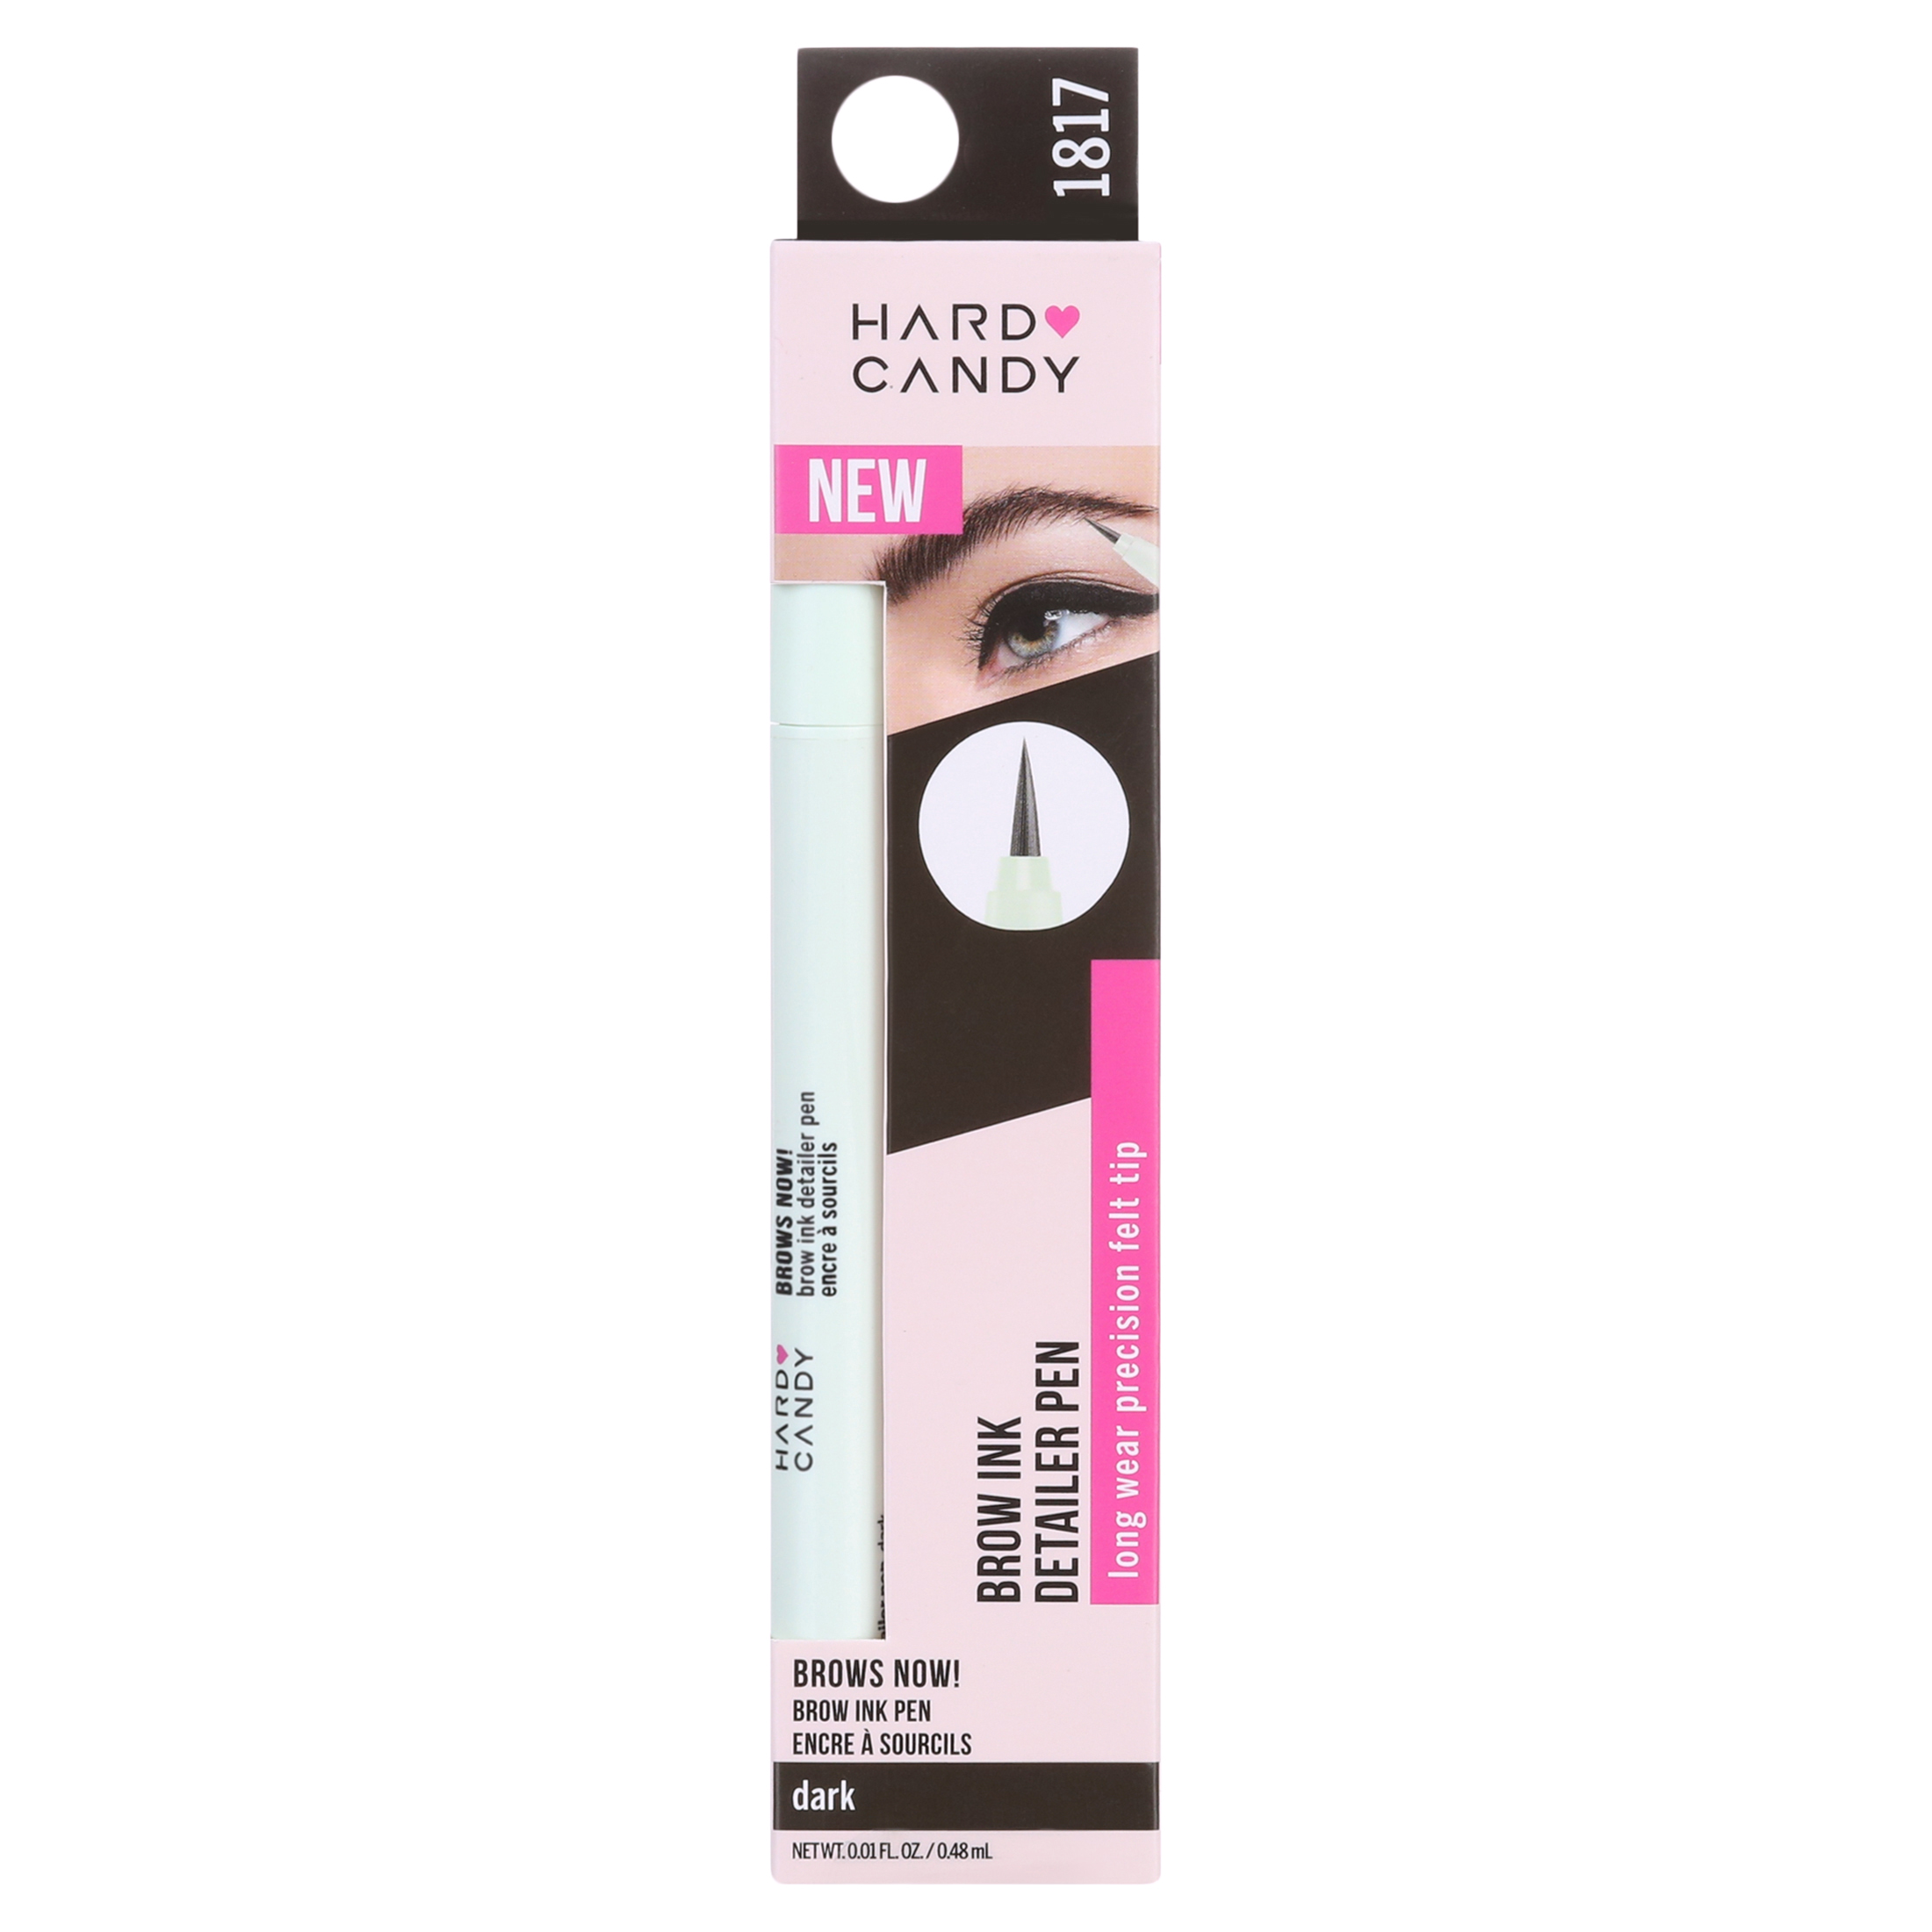 Hard Candy Brows Now! Precision Tip Brow Ink Medium/Dark - image 1 of 7